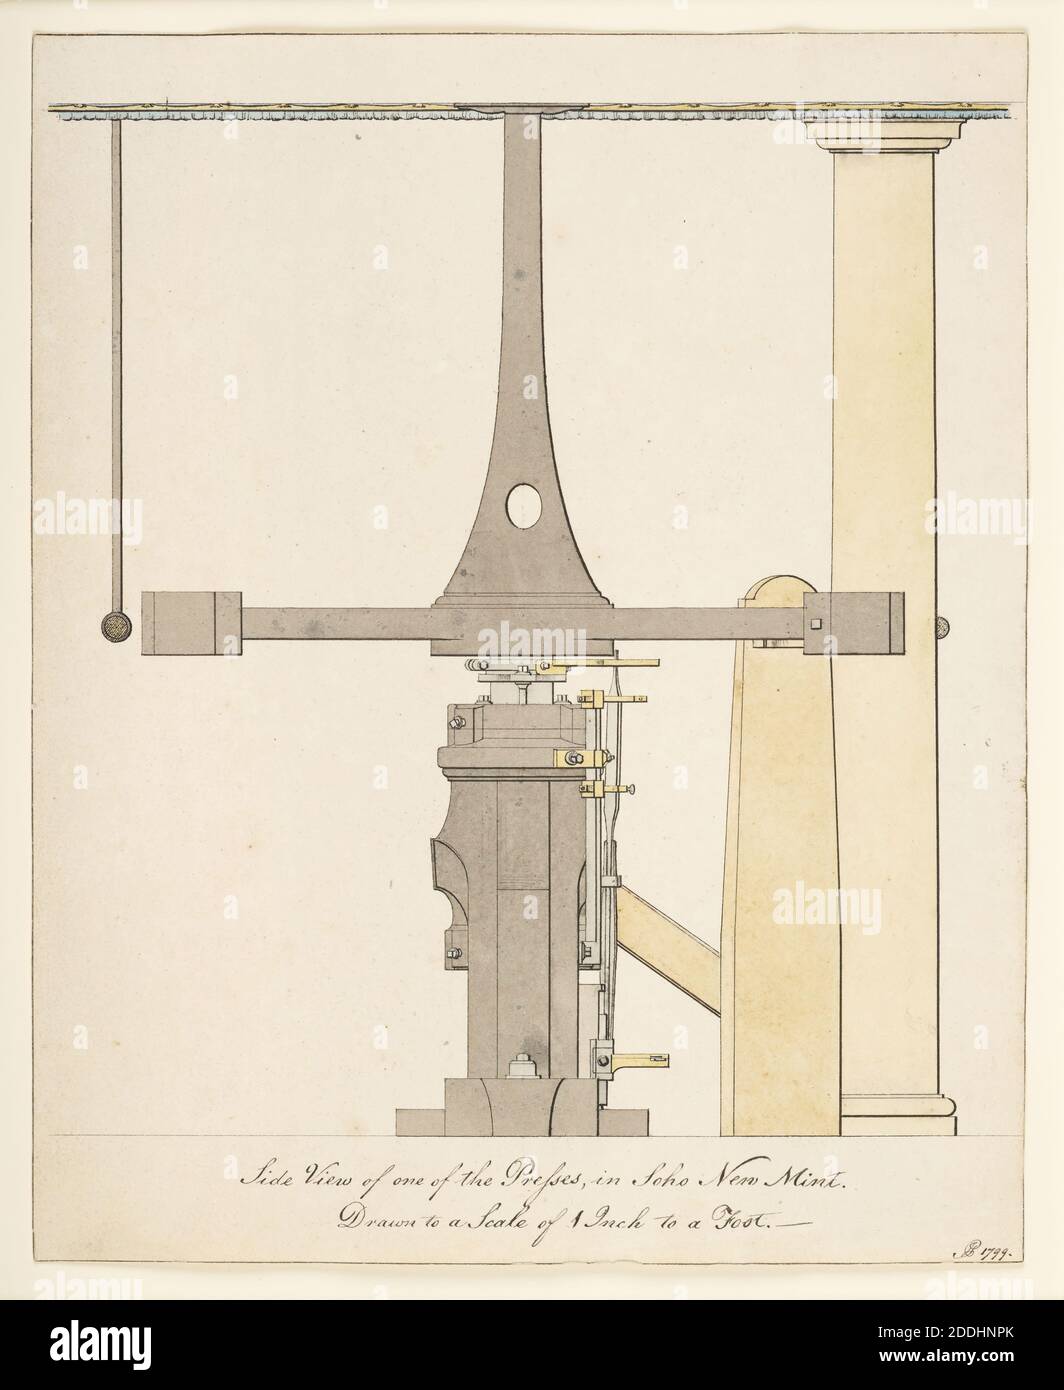 Side view of the Presses in Matthew Boulton's Soho New Mint, 1799, Side view of coin press, from album of John Phillp drawings and watercolours of Handsworth and Soho, Social history, Drawing, Ink, Coin, Science and Industry, Manufacturers, Birmingham history, Money Stock Photo